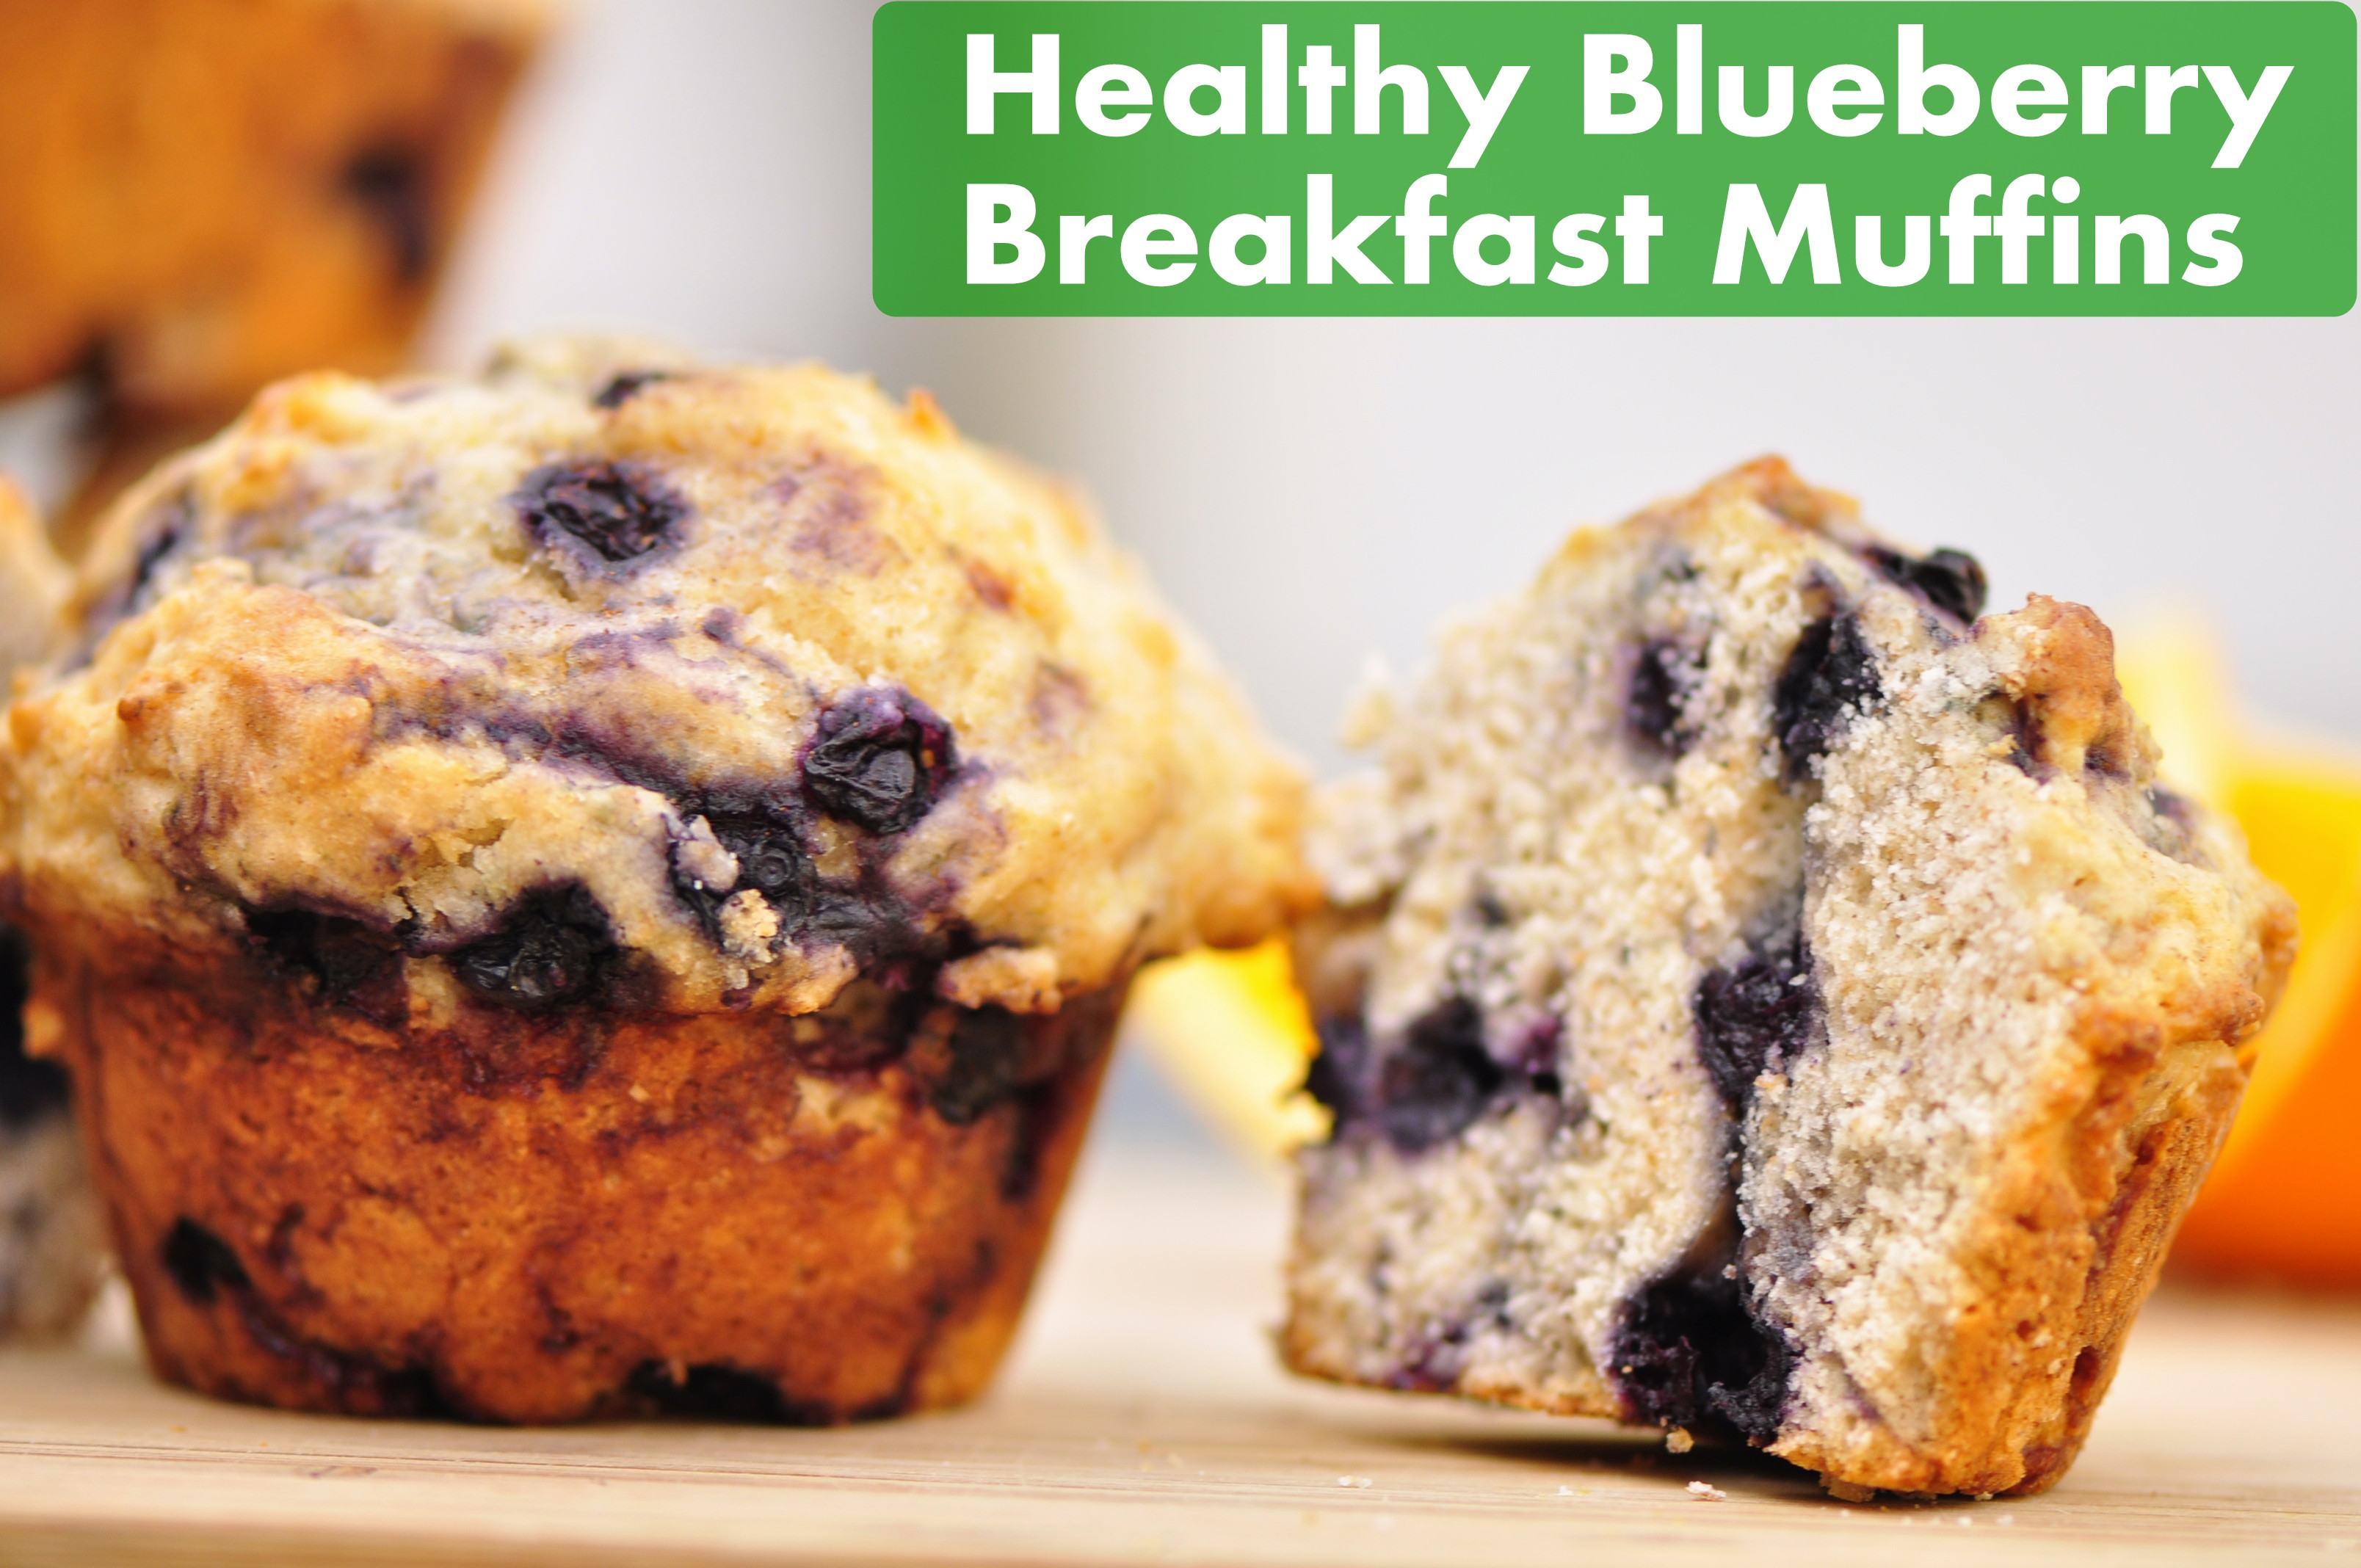 Healthy Breakfast Muffin Recipes
 Healthy Blueberry Breakfast Muffins – the ve arian ginger